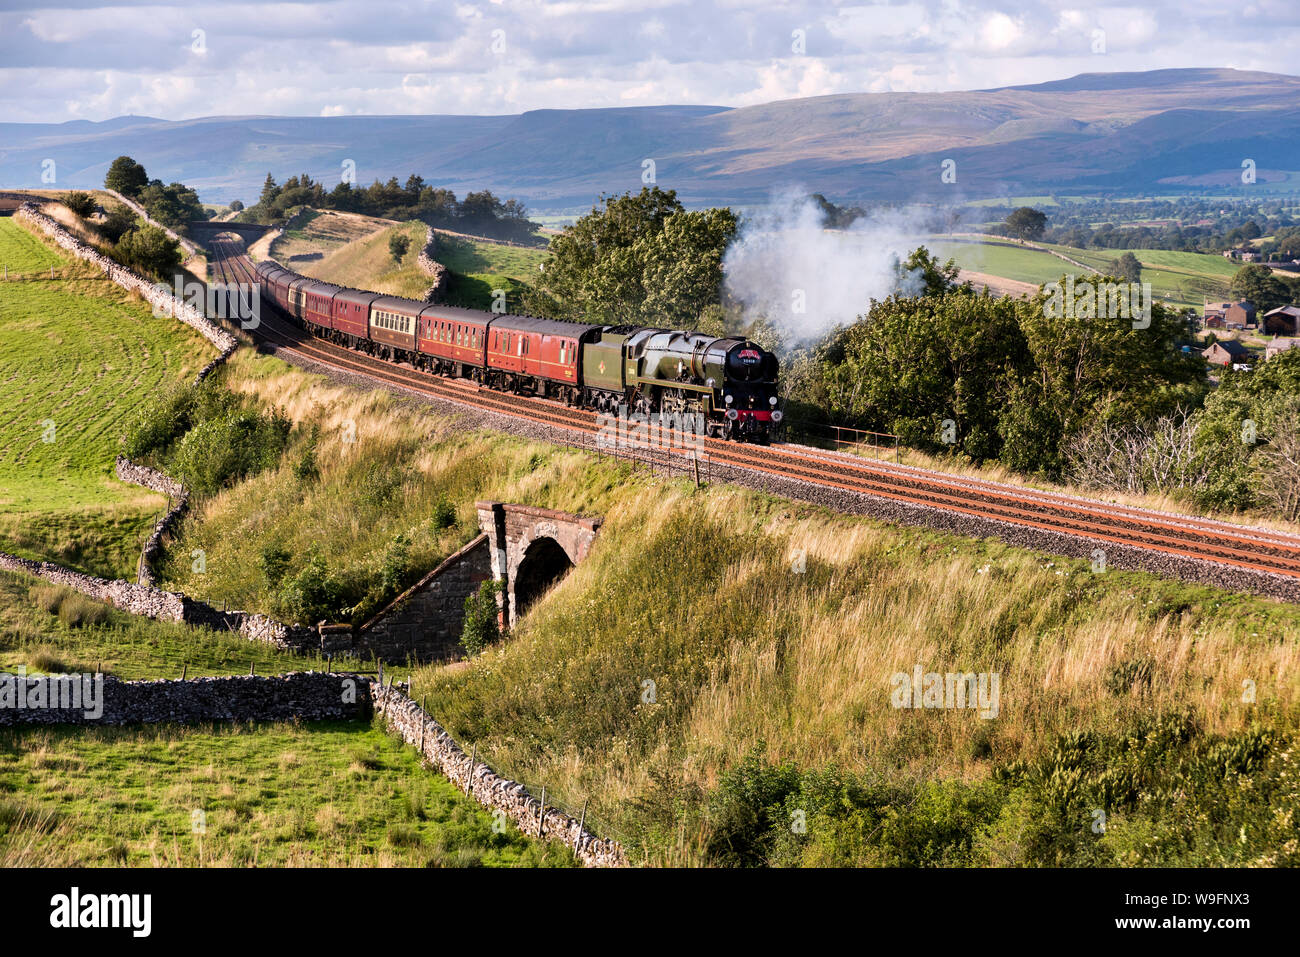 Kirkby Stephen, Cumbria, UK. 13th Aug, 2019. 1940s steam locomotive 'British India Line' No. 35018 with 'The Dalesman' steam special at Birkett Common near Kirkby Stephen, Cumbria. Seen here on the return trip, the train ran from York to Carlisle and return, with steam haulage from Hellifield near Skipton to Carlisle and back. Credit: John Bentley/Alamy Live News Stock Photo